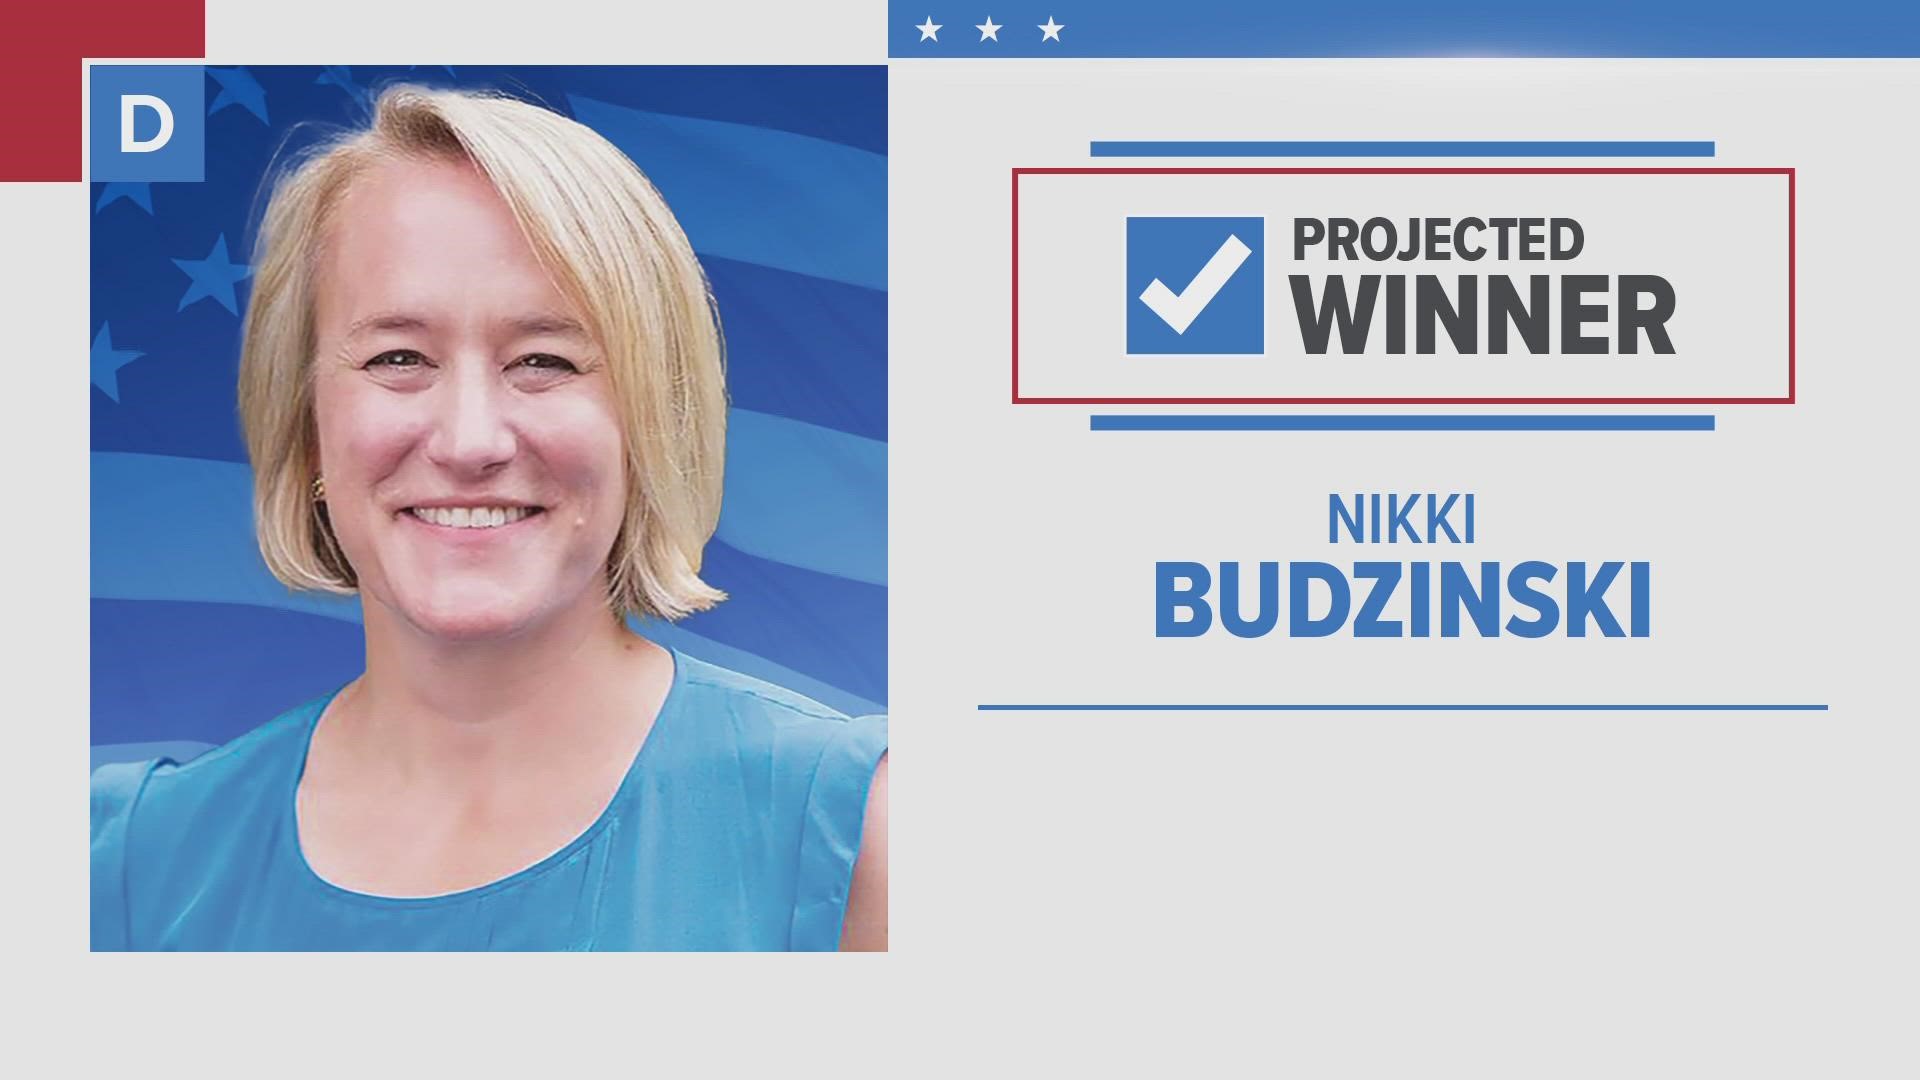 The opportunity to represent central and southern Illinoisans is Budzinski’s "greatest honor," according to a statement from her campaign office.